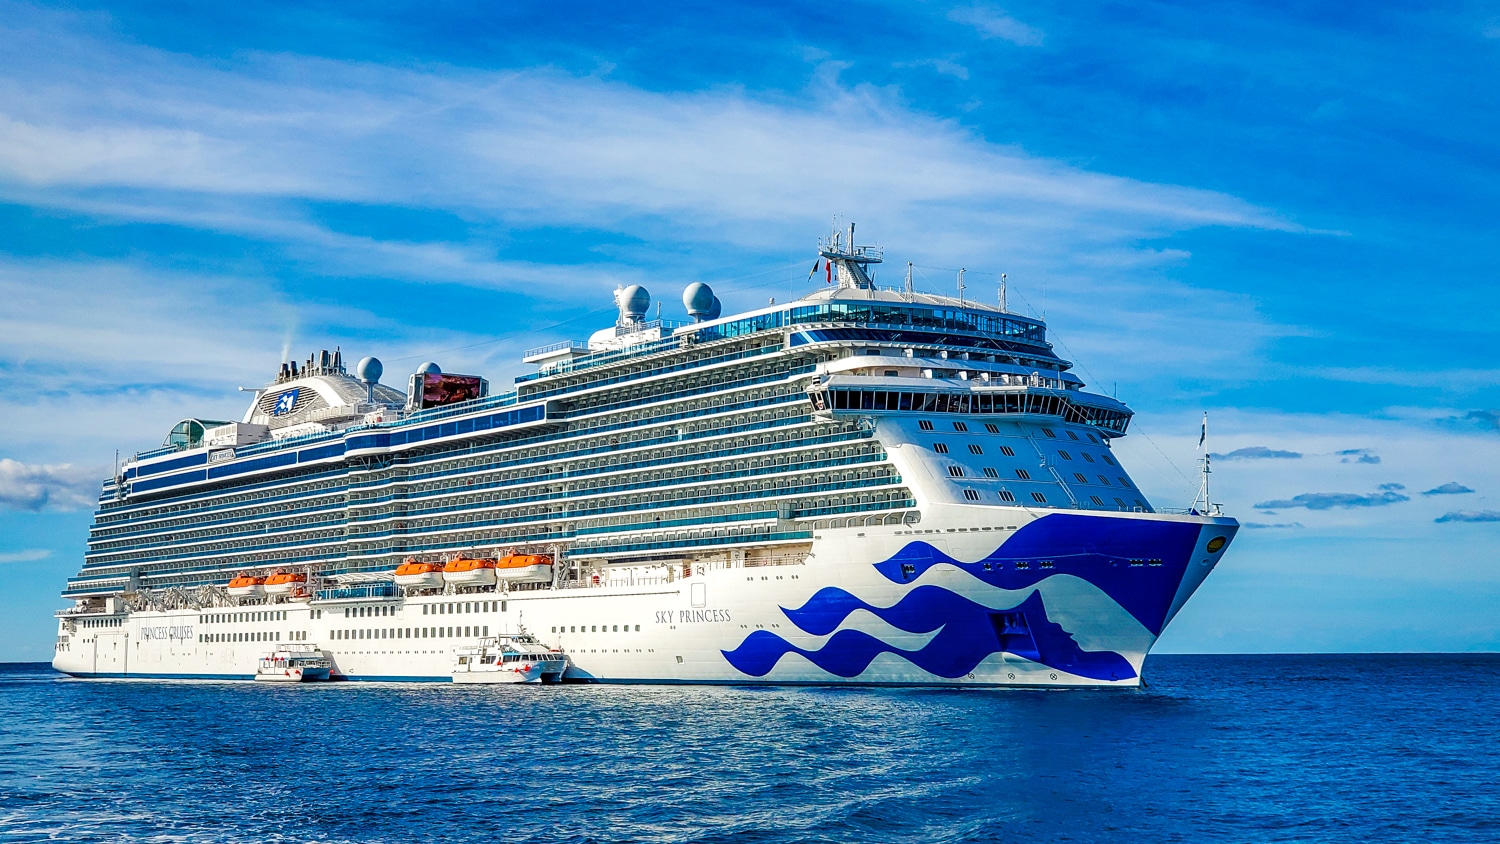 All Princess Cruise Ships Will Have MedallionNet WiFi on Return to Service